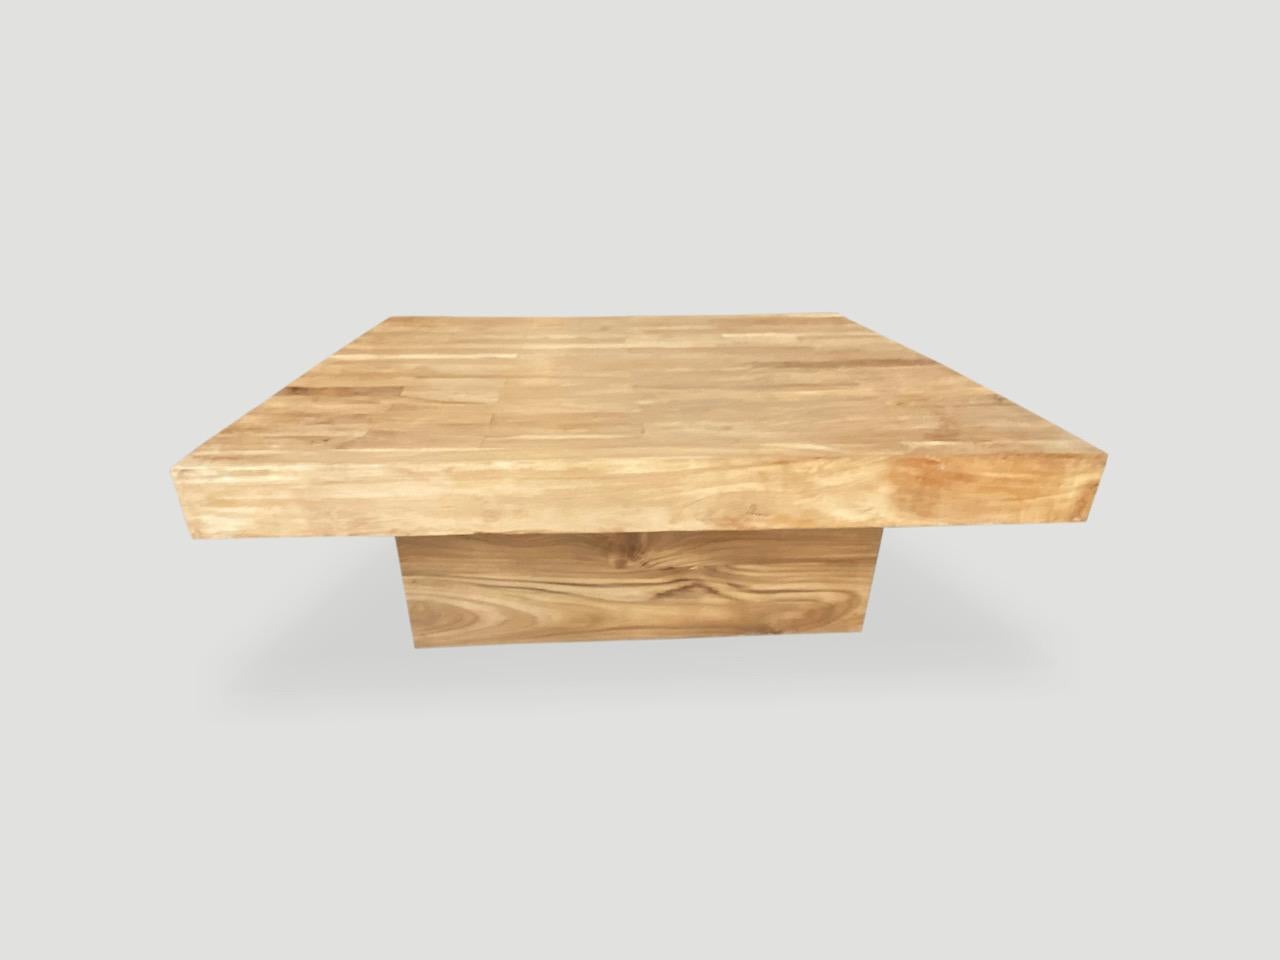 Andrianna Shamaris Reclaimed Square Natural Teak Wood Coffee Table In Excellent Condition For Sale In New York, NY